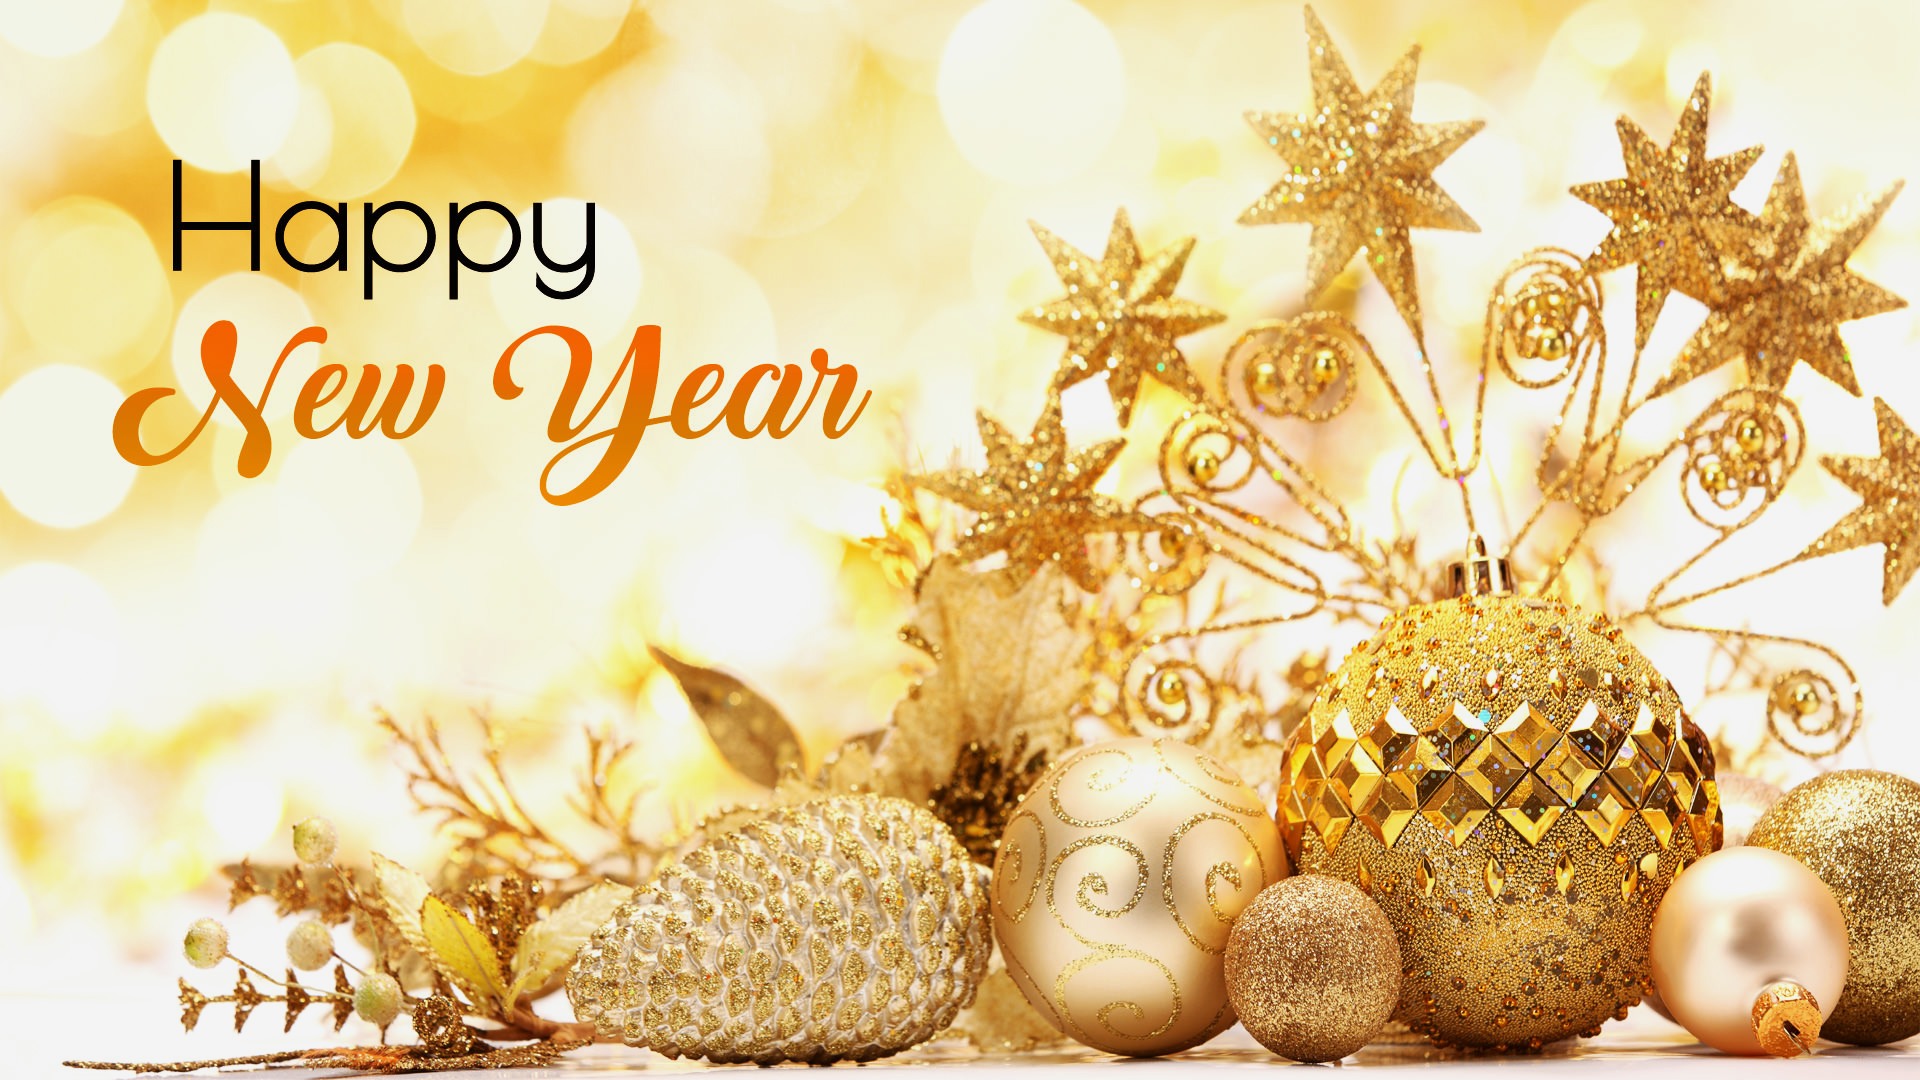 Special Happy New Year 2018 Wallpaper Hd Greetings - Celebration New Year 2020 - HD Wallpaper 